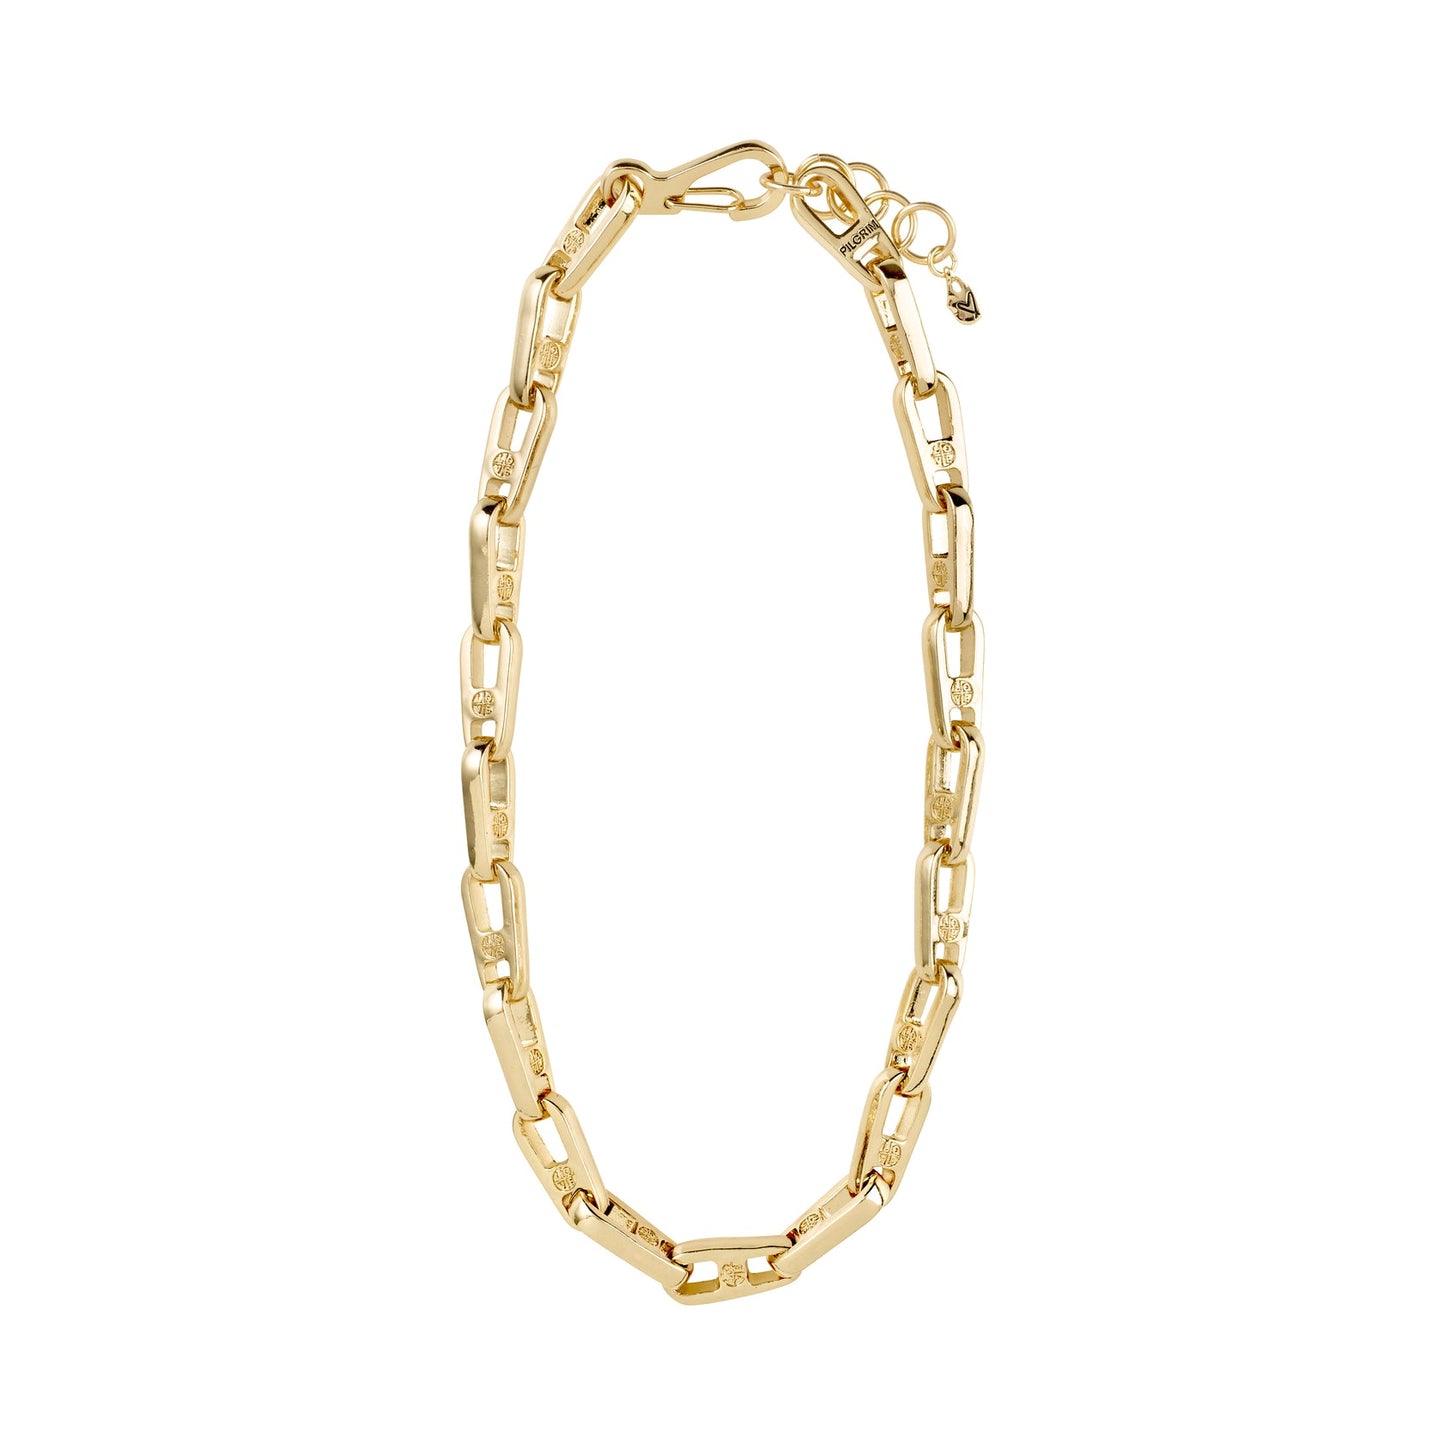 LOVE CHAIN NECKLACE / GOLD PLATED